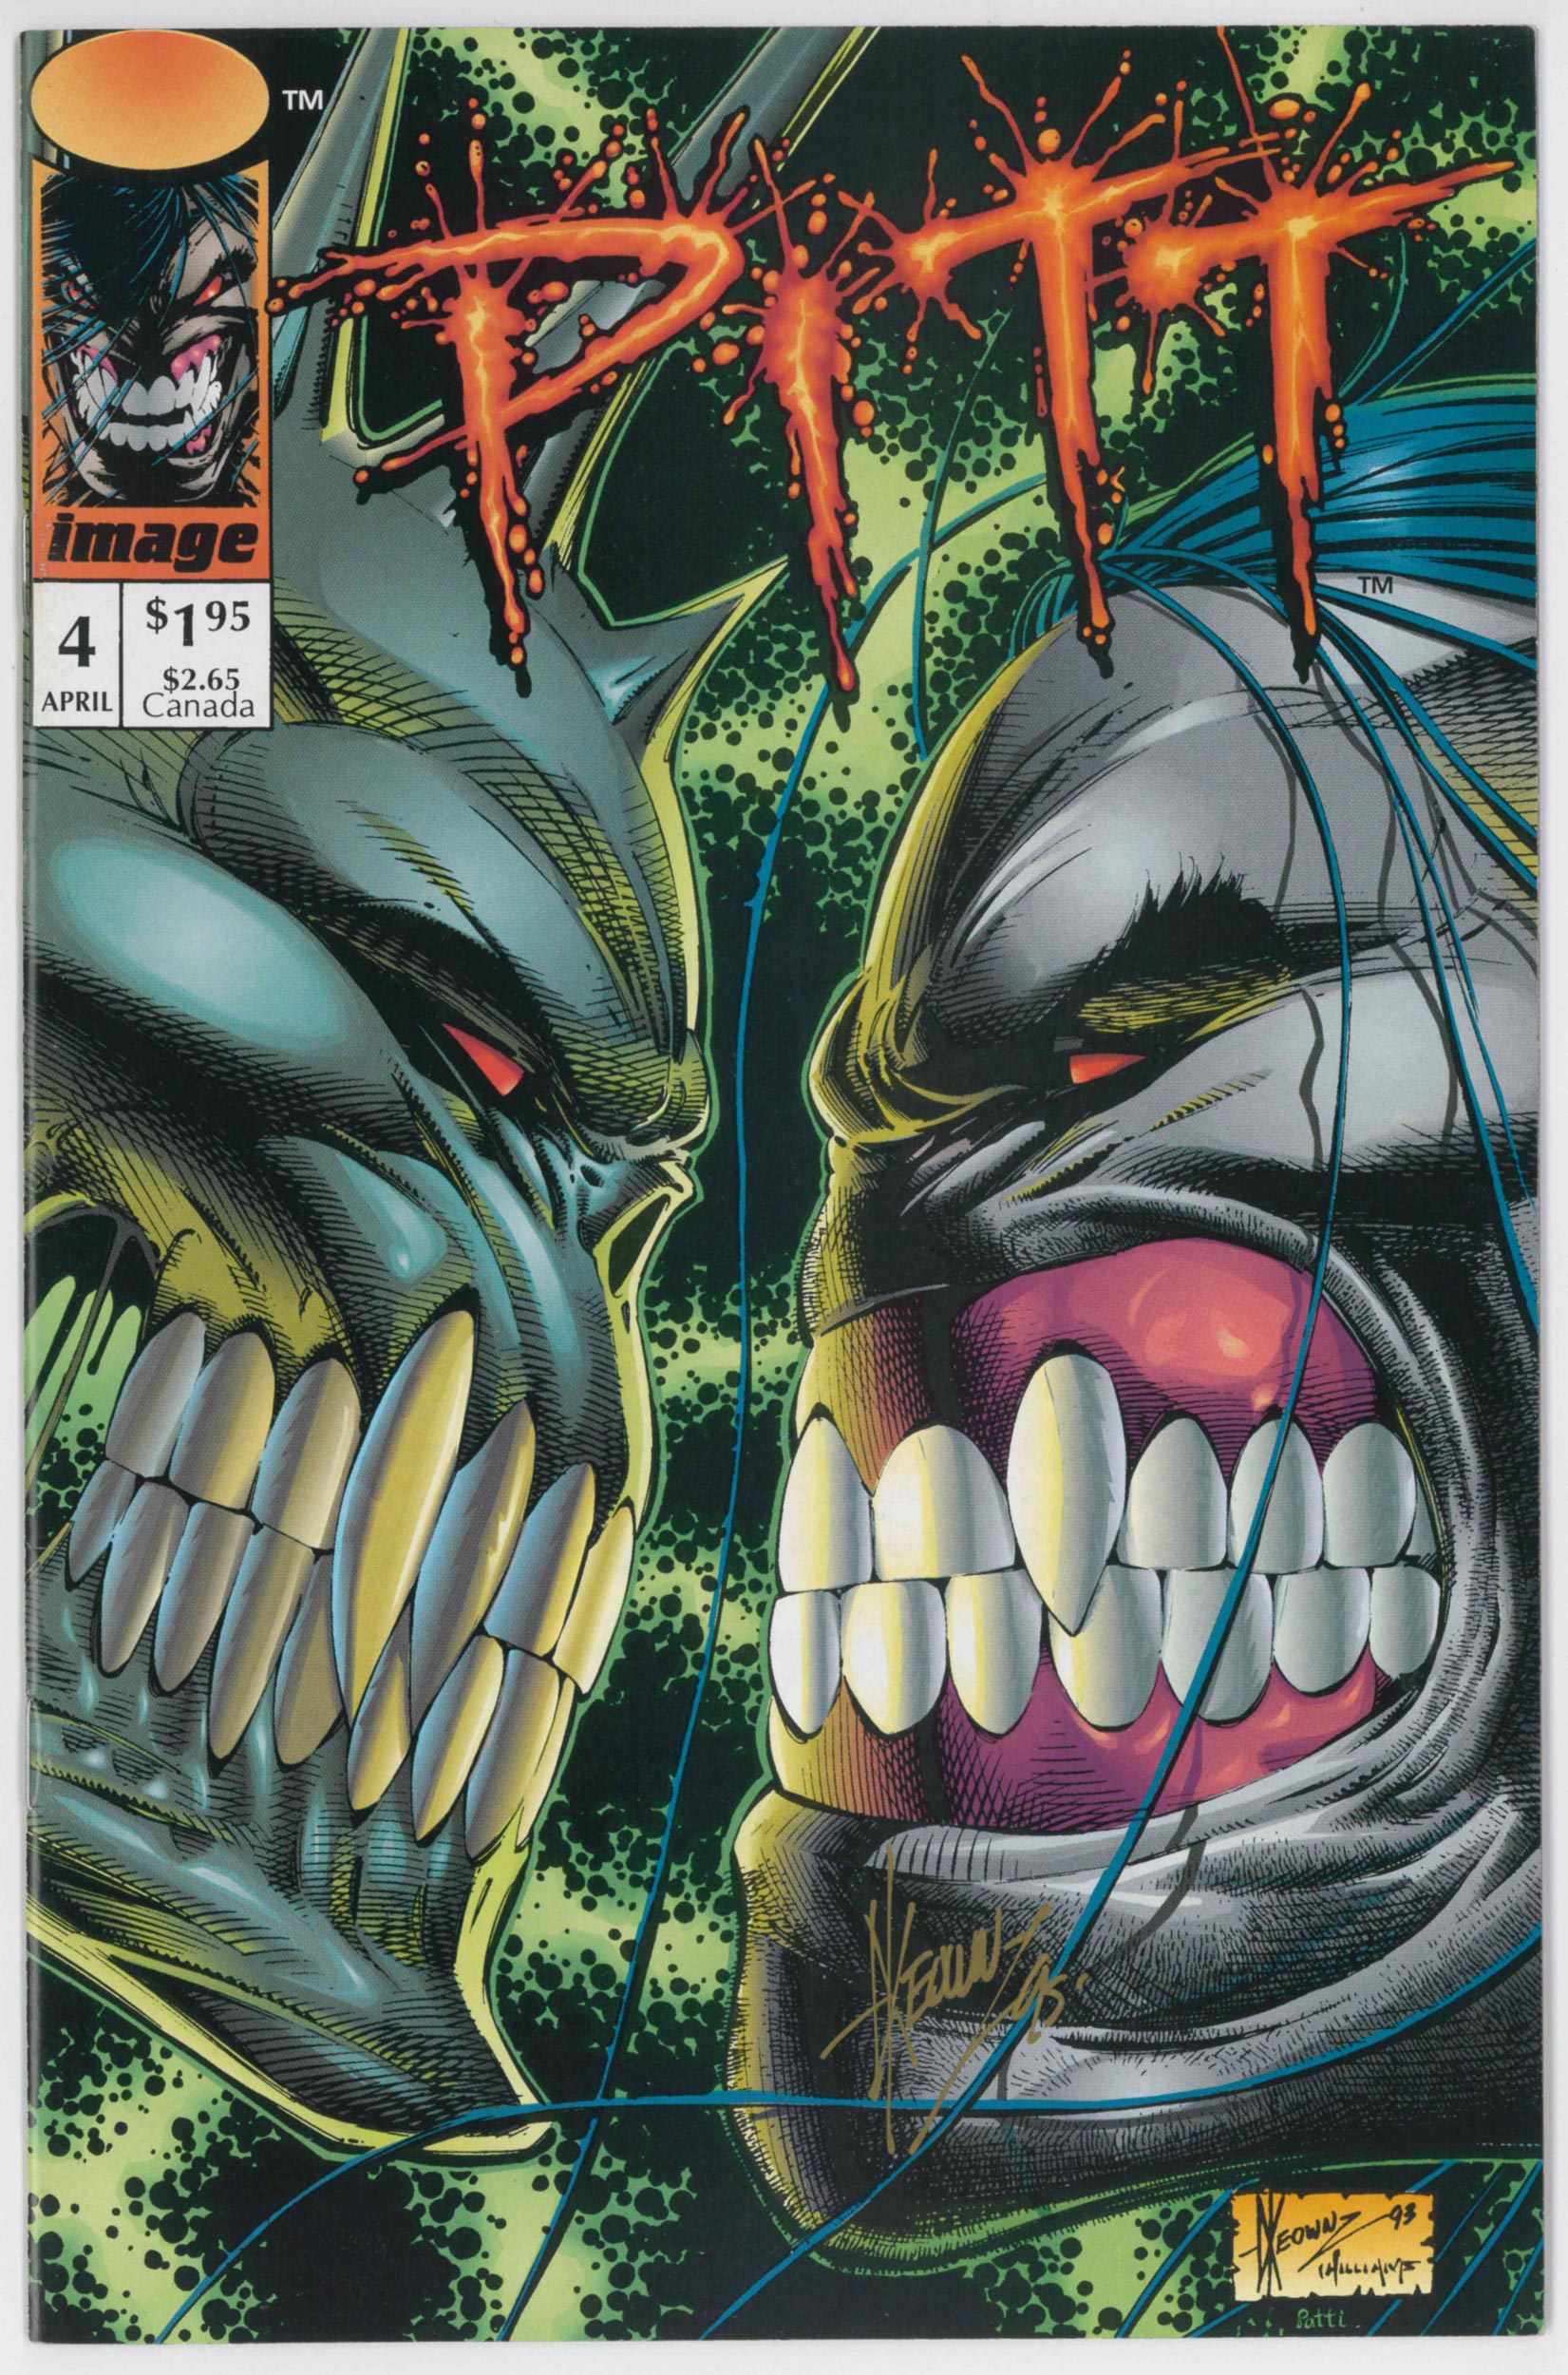 PITT (1993) #4 - SIGNED BY DALE KEOWN